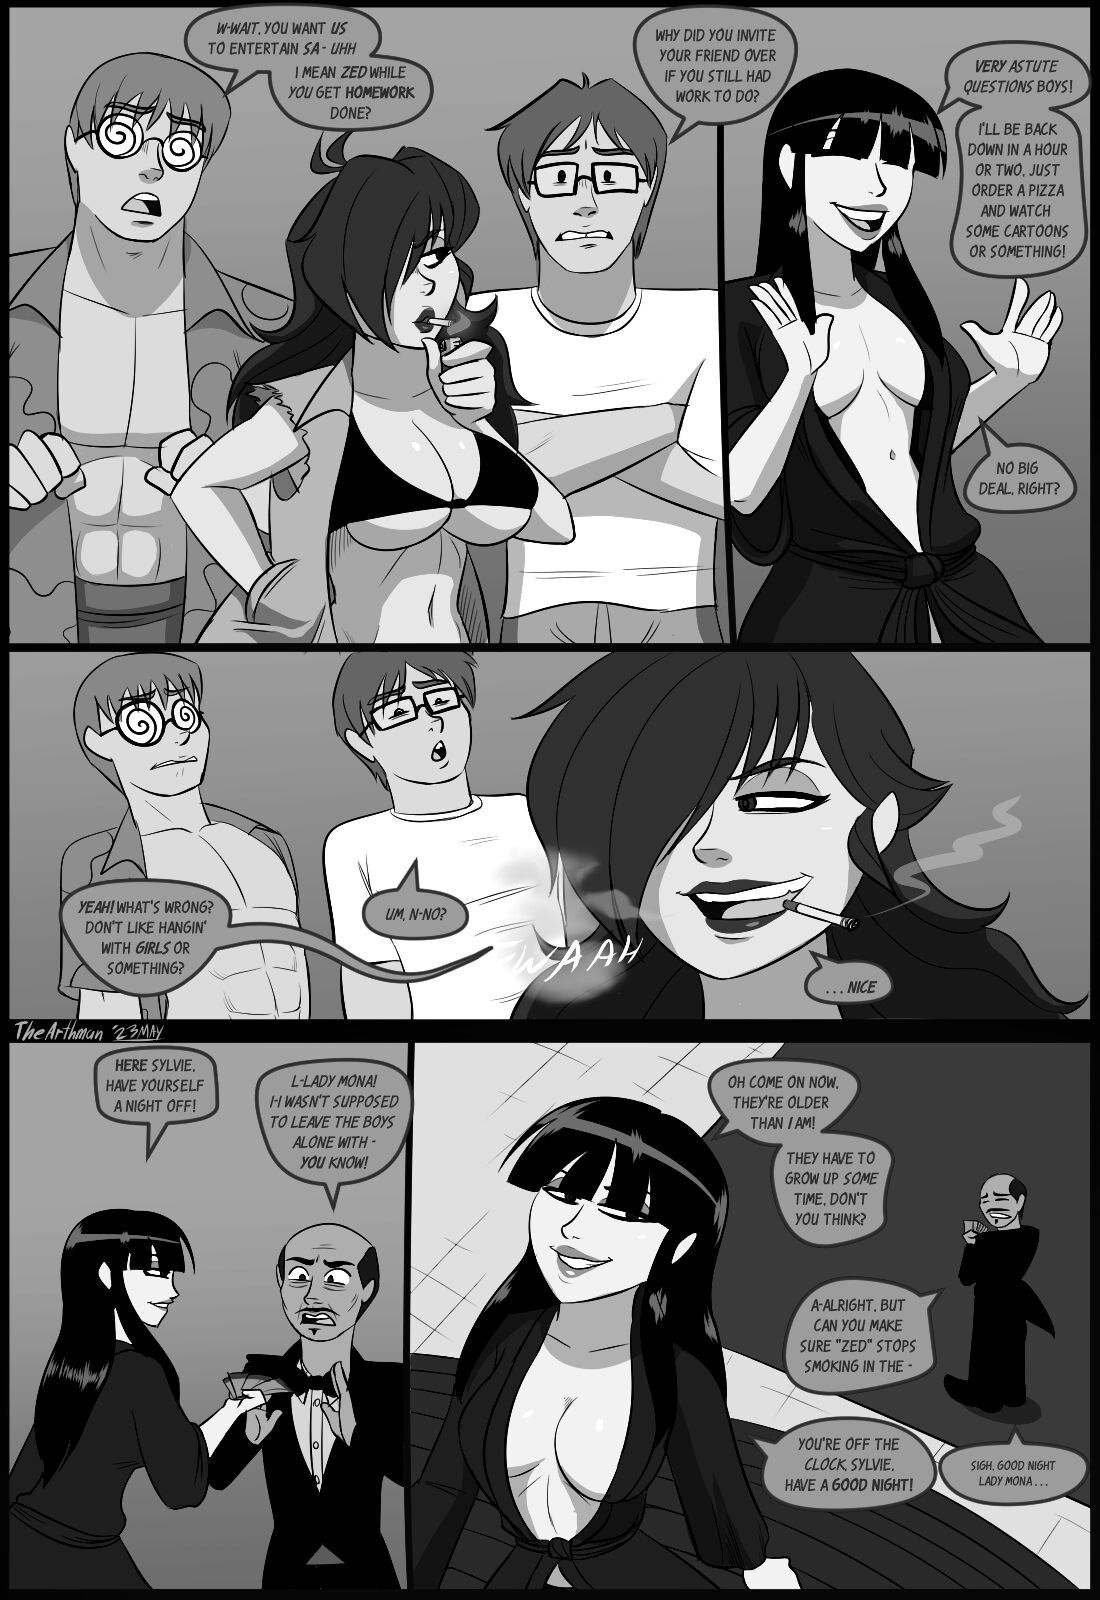 Dirtwater - Chapter 7 - Path of Sin Porn Comic english 13